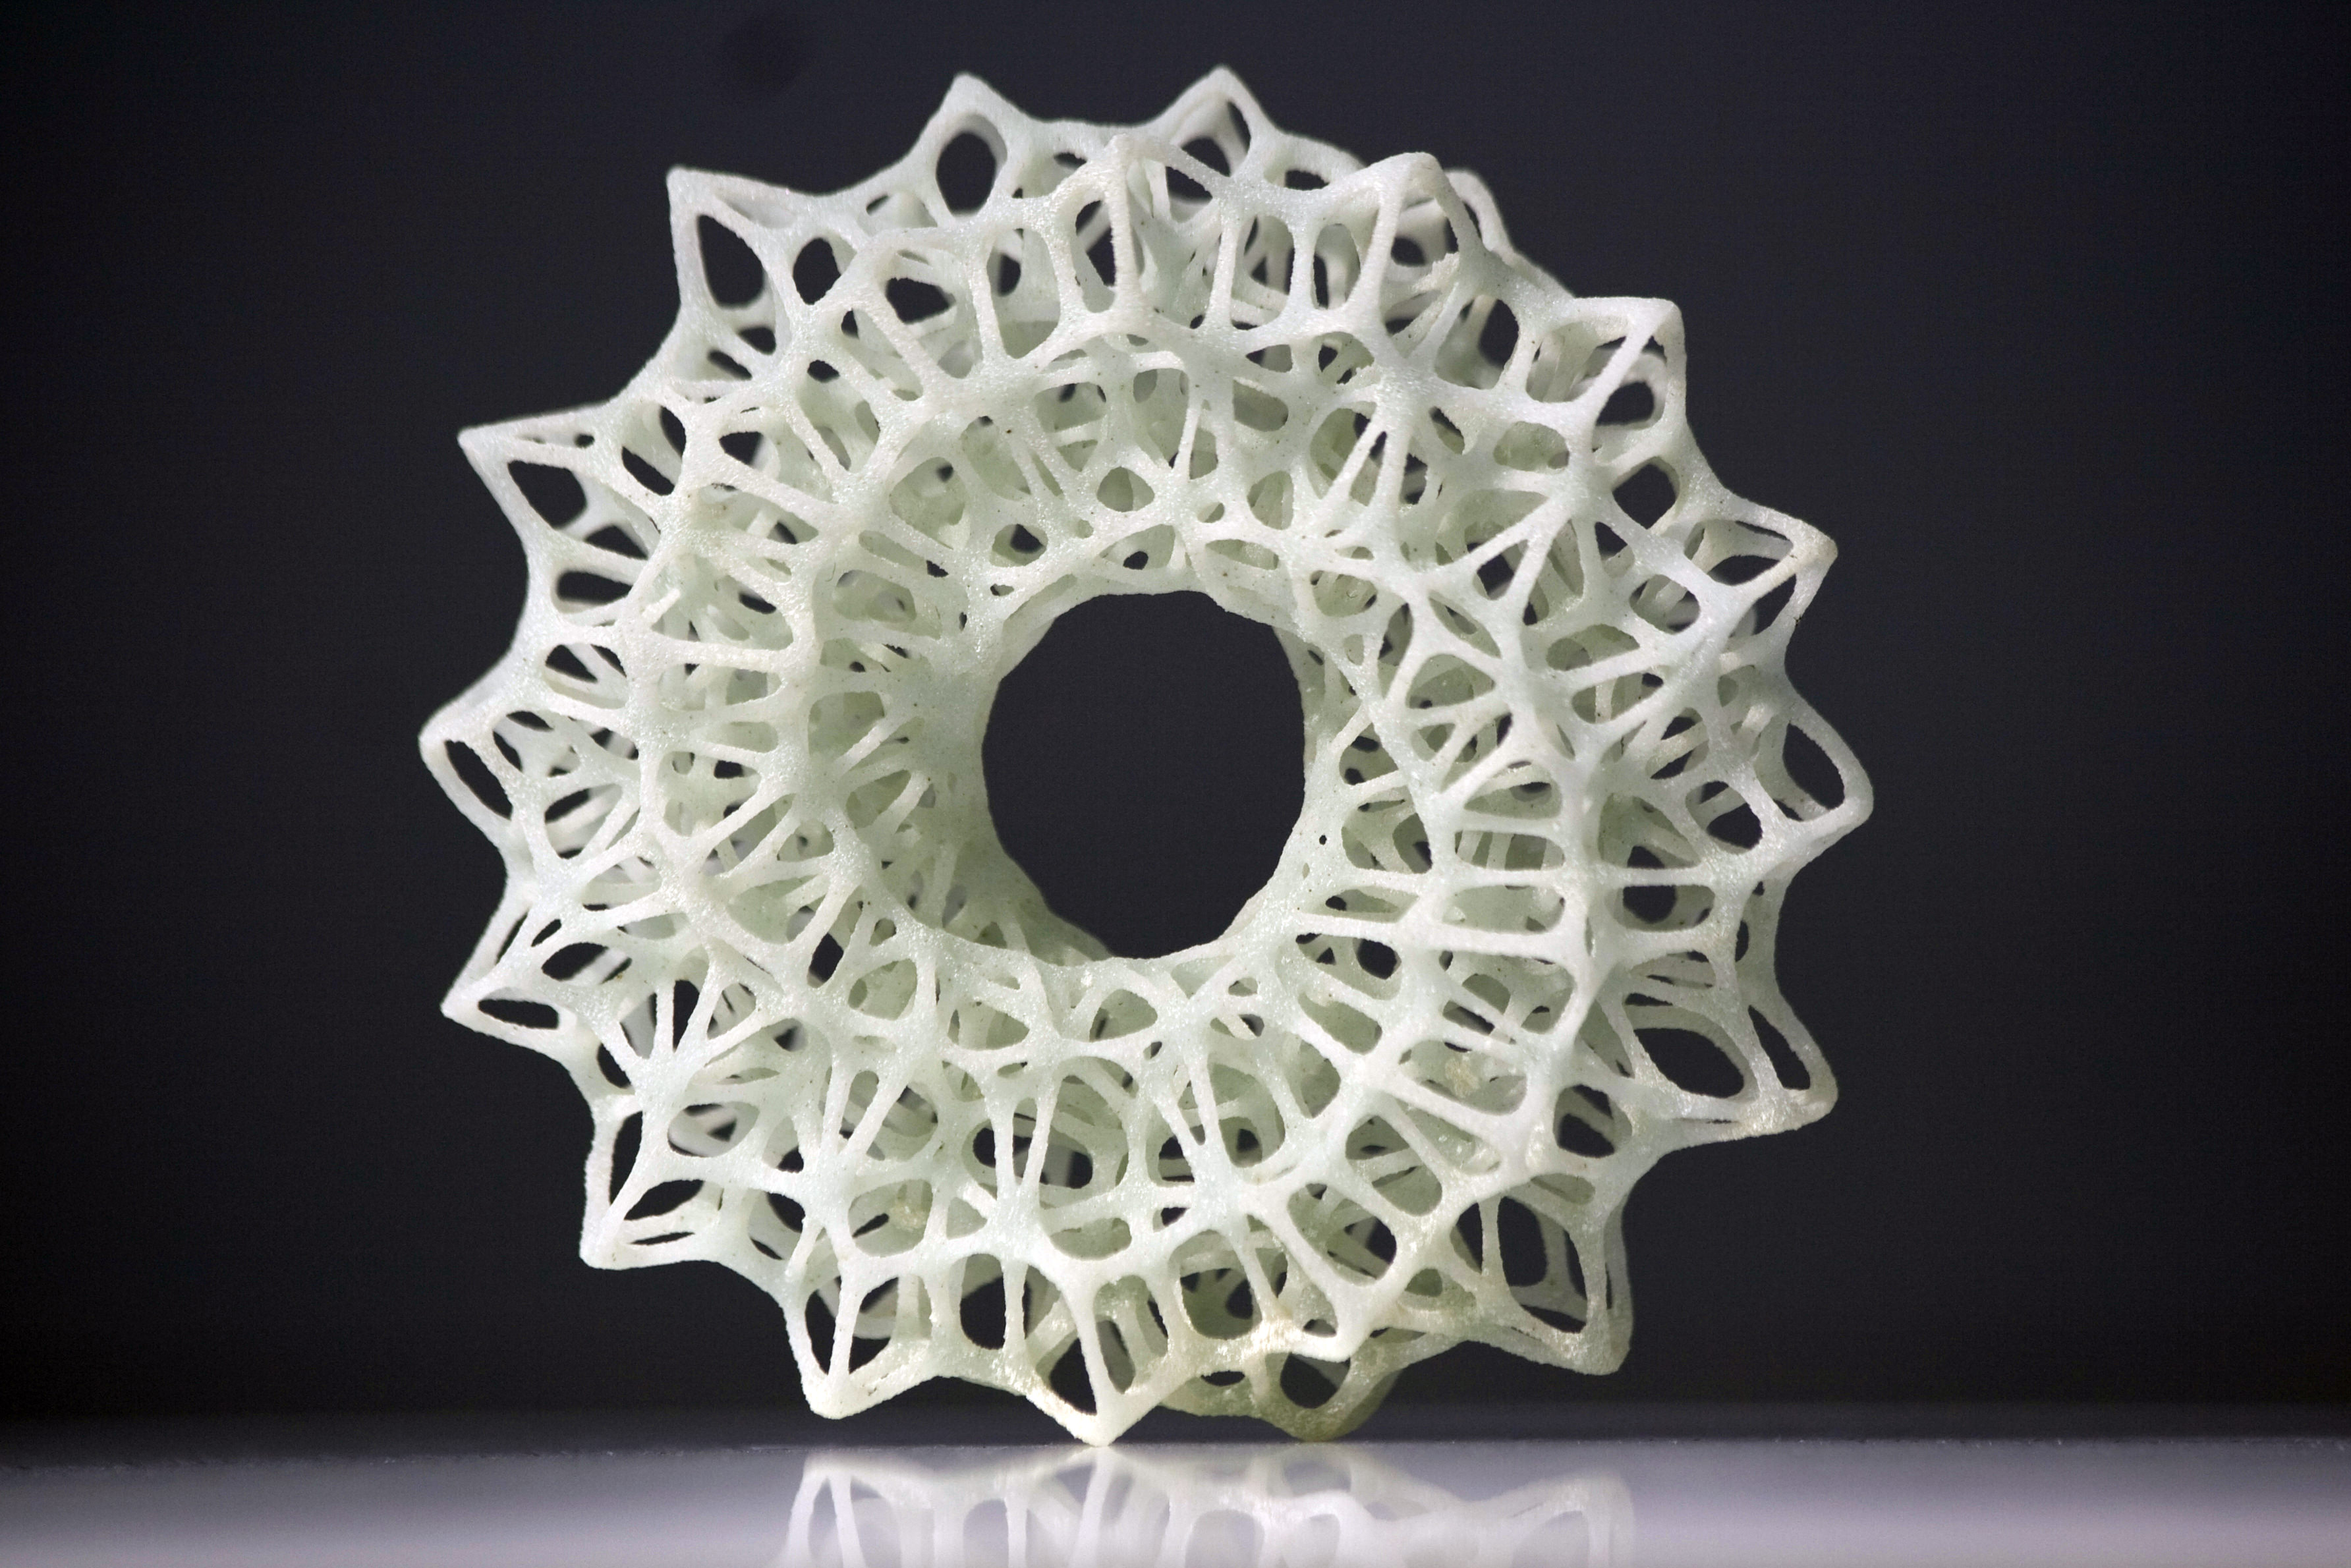 The Weird World Of 3D Printing – Ribs, Guns And Lamps